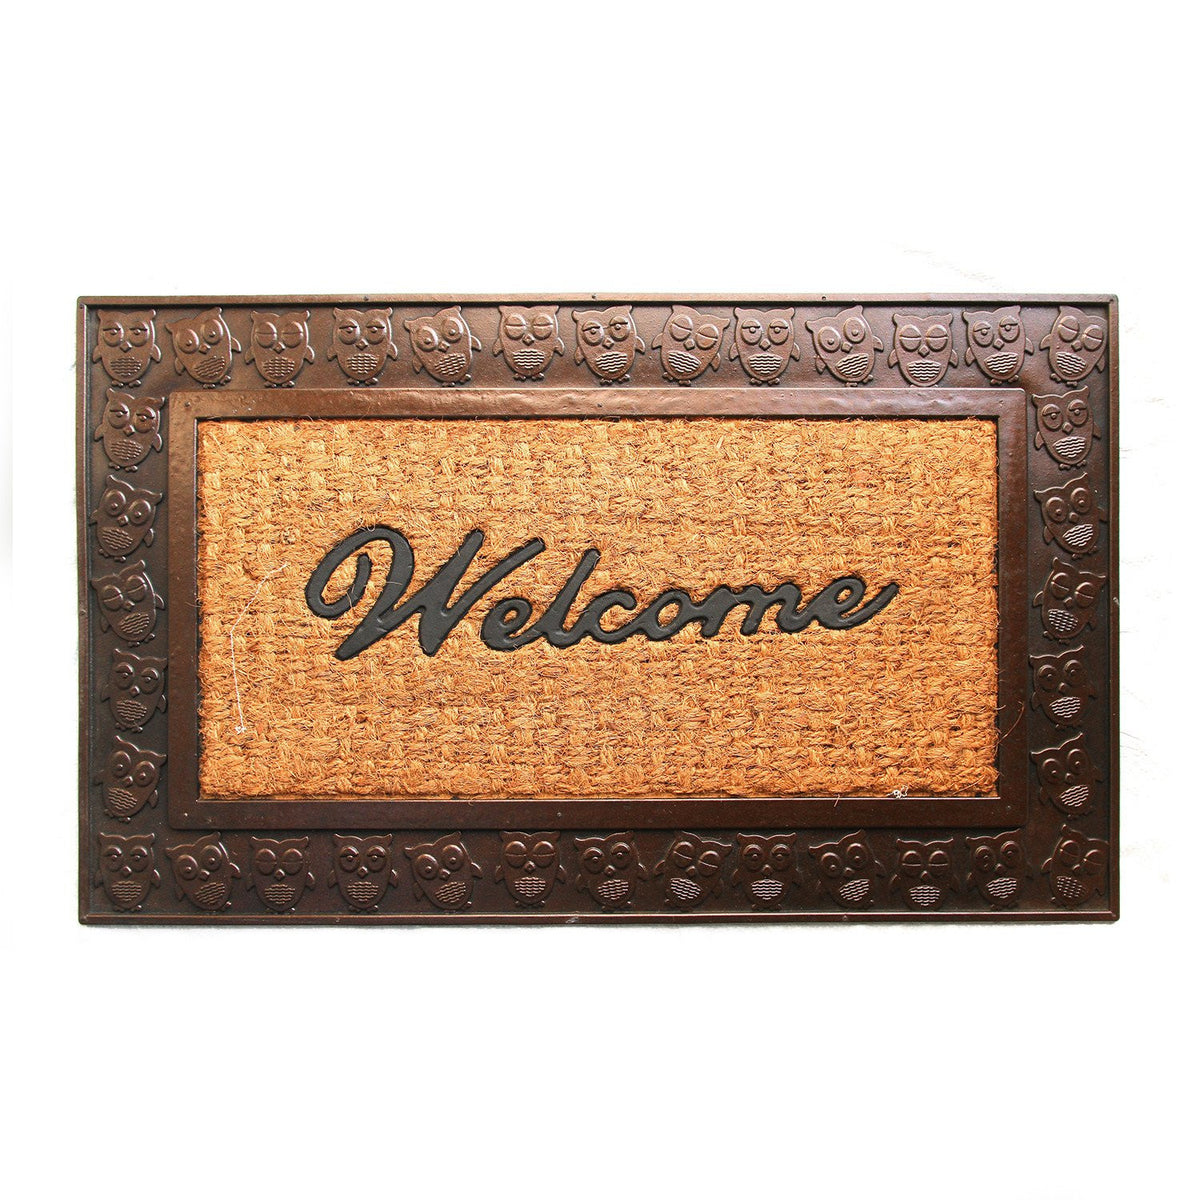 Brown Coco Rubber Welcome Entrance Door Mat with Owl Design Border - OnlyMat